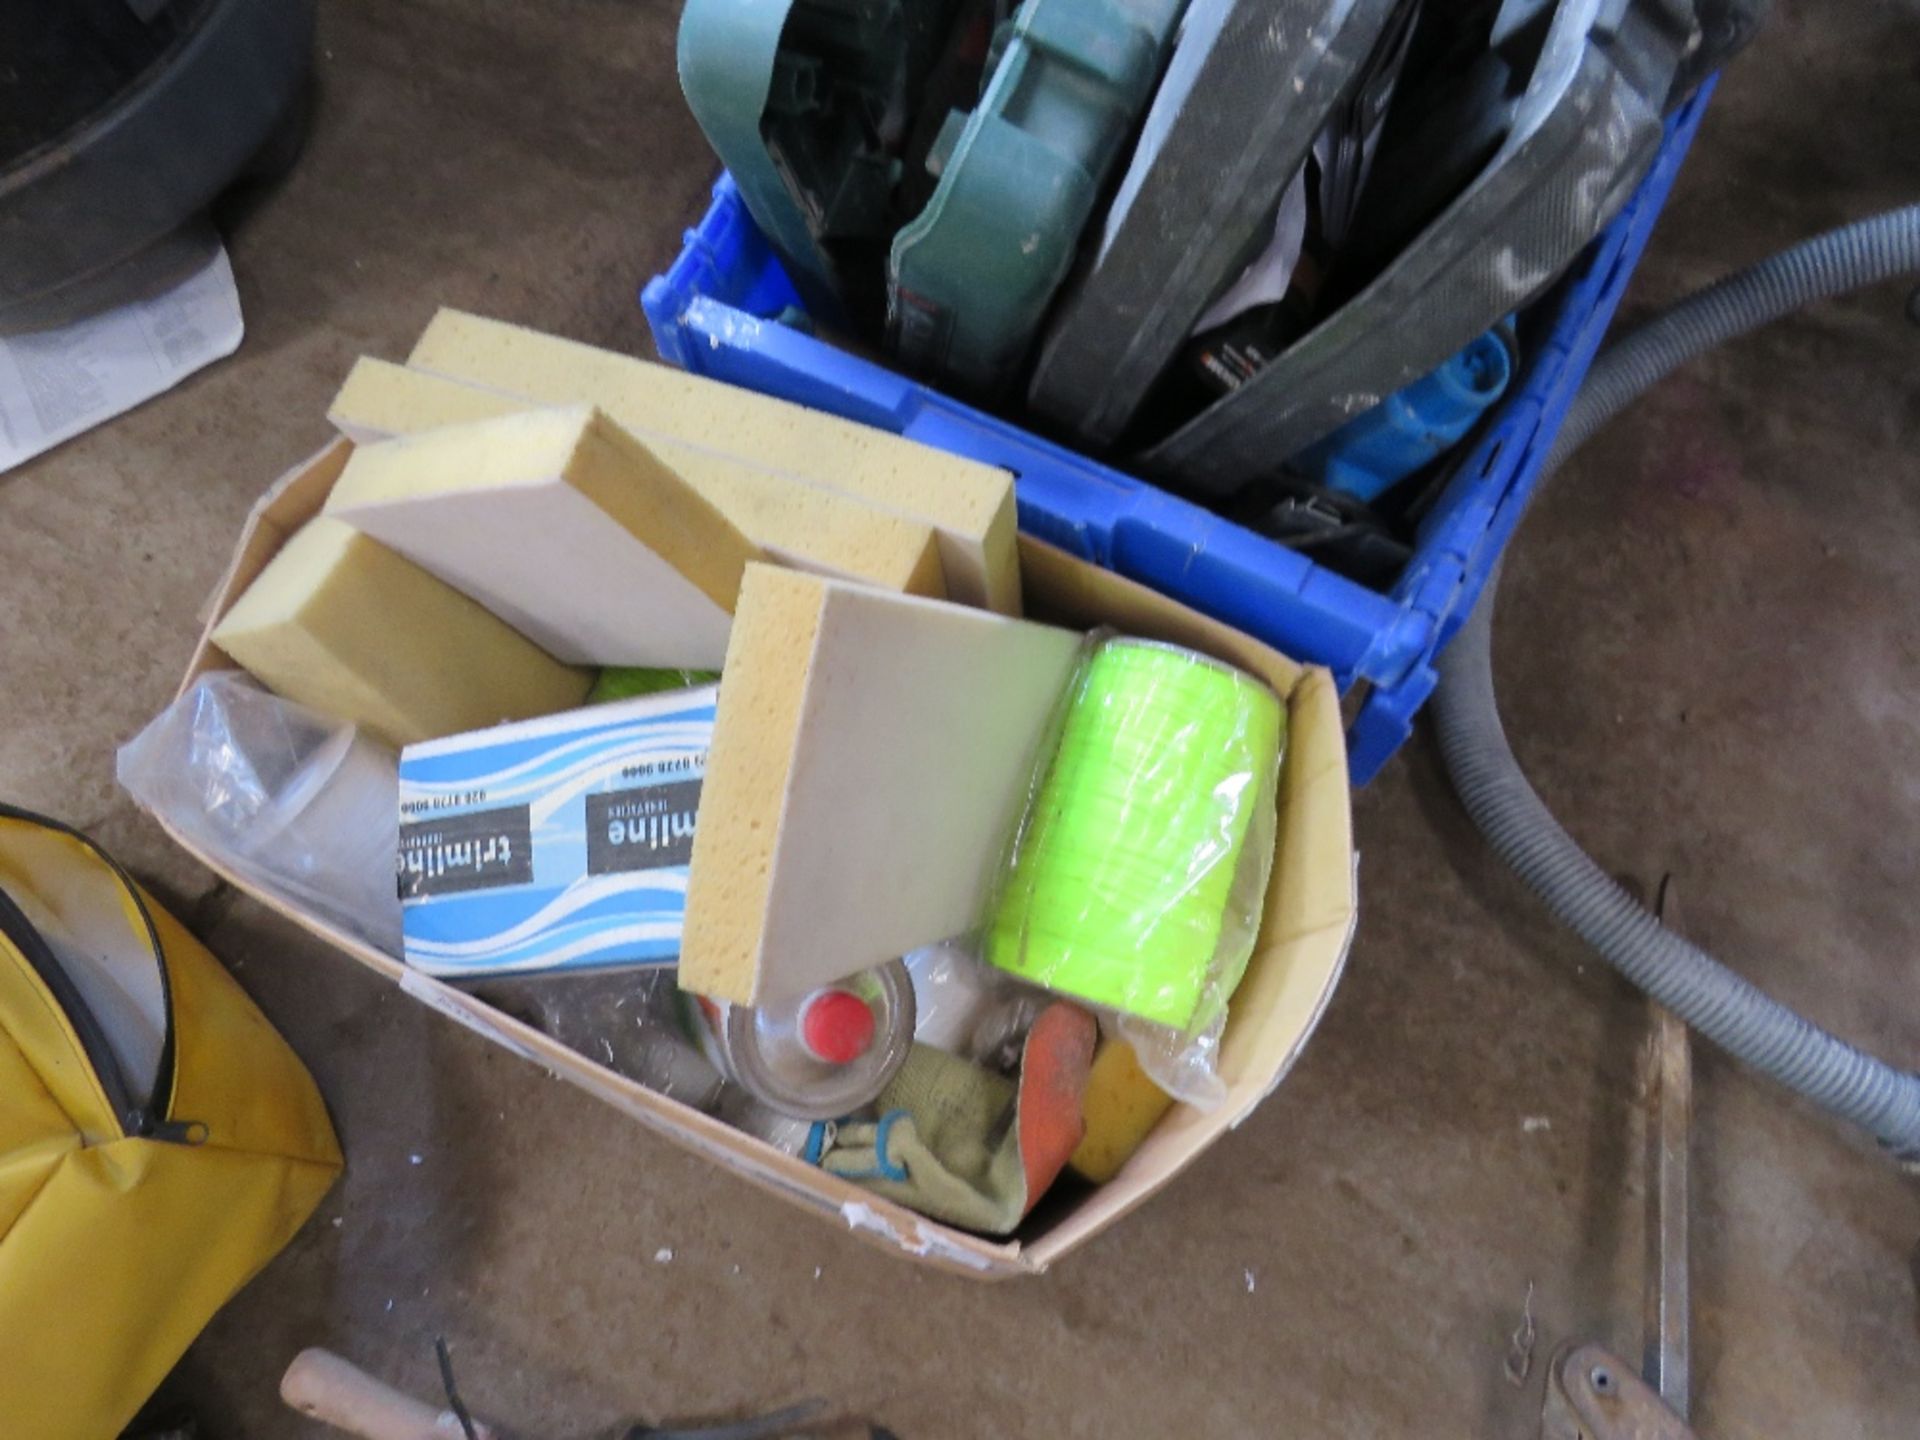 Box of grouting sponges, power tools, hand tools and sundry items...sourced frm company liquidation - Image 2 of 5